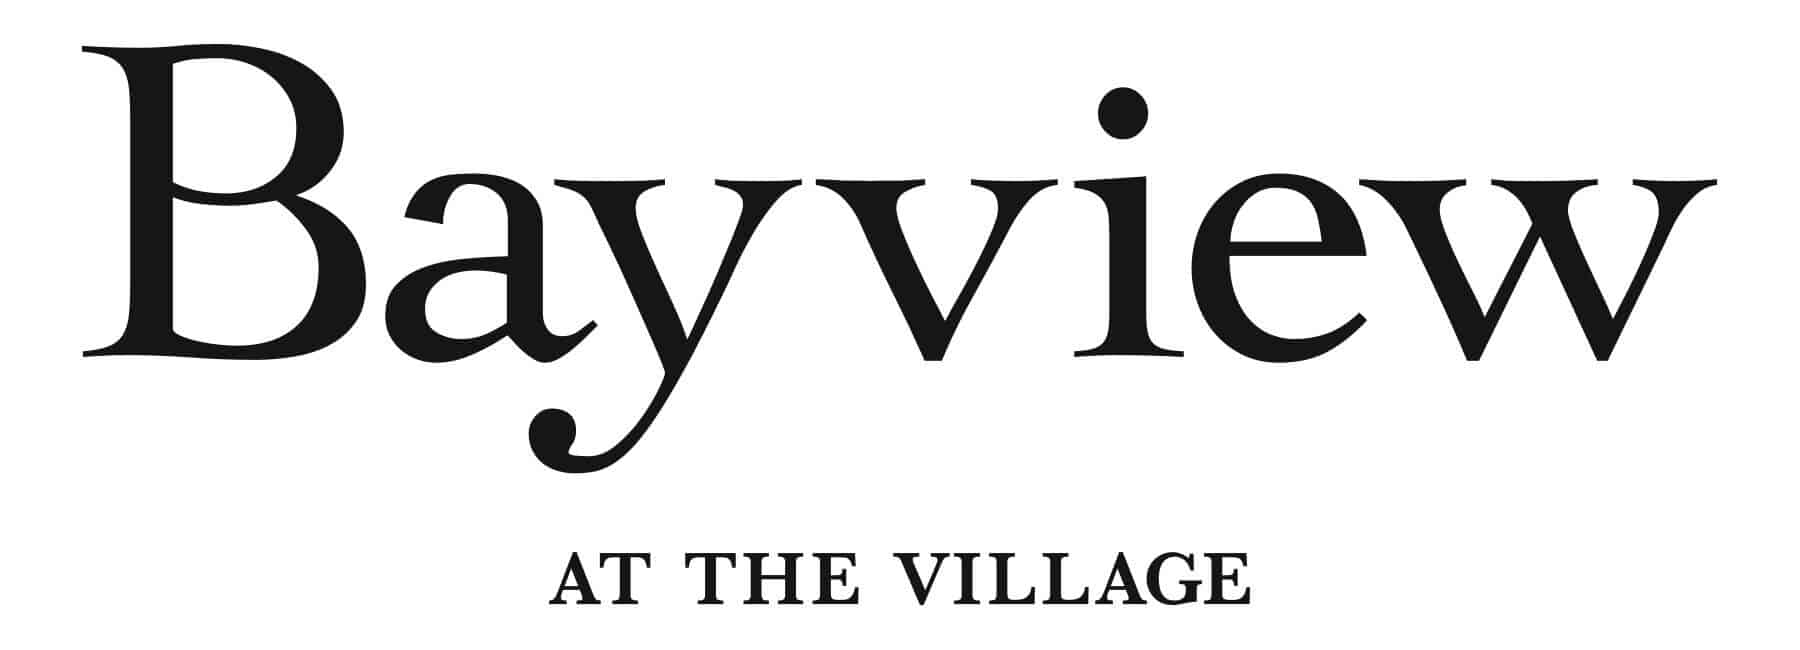 Bayview at The Village